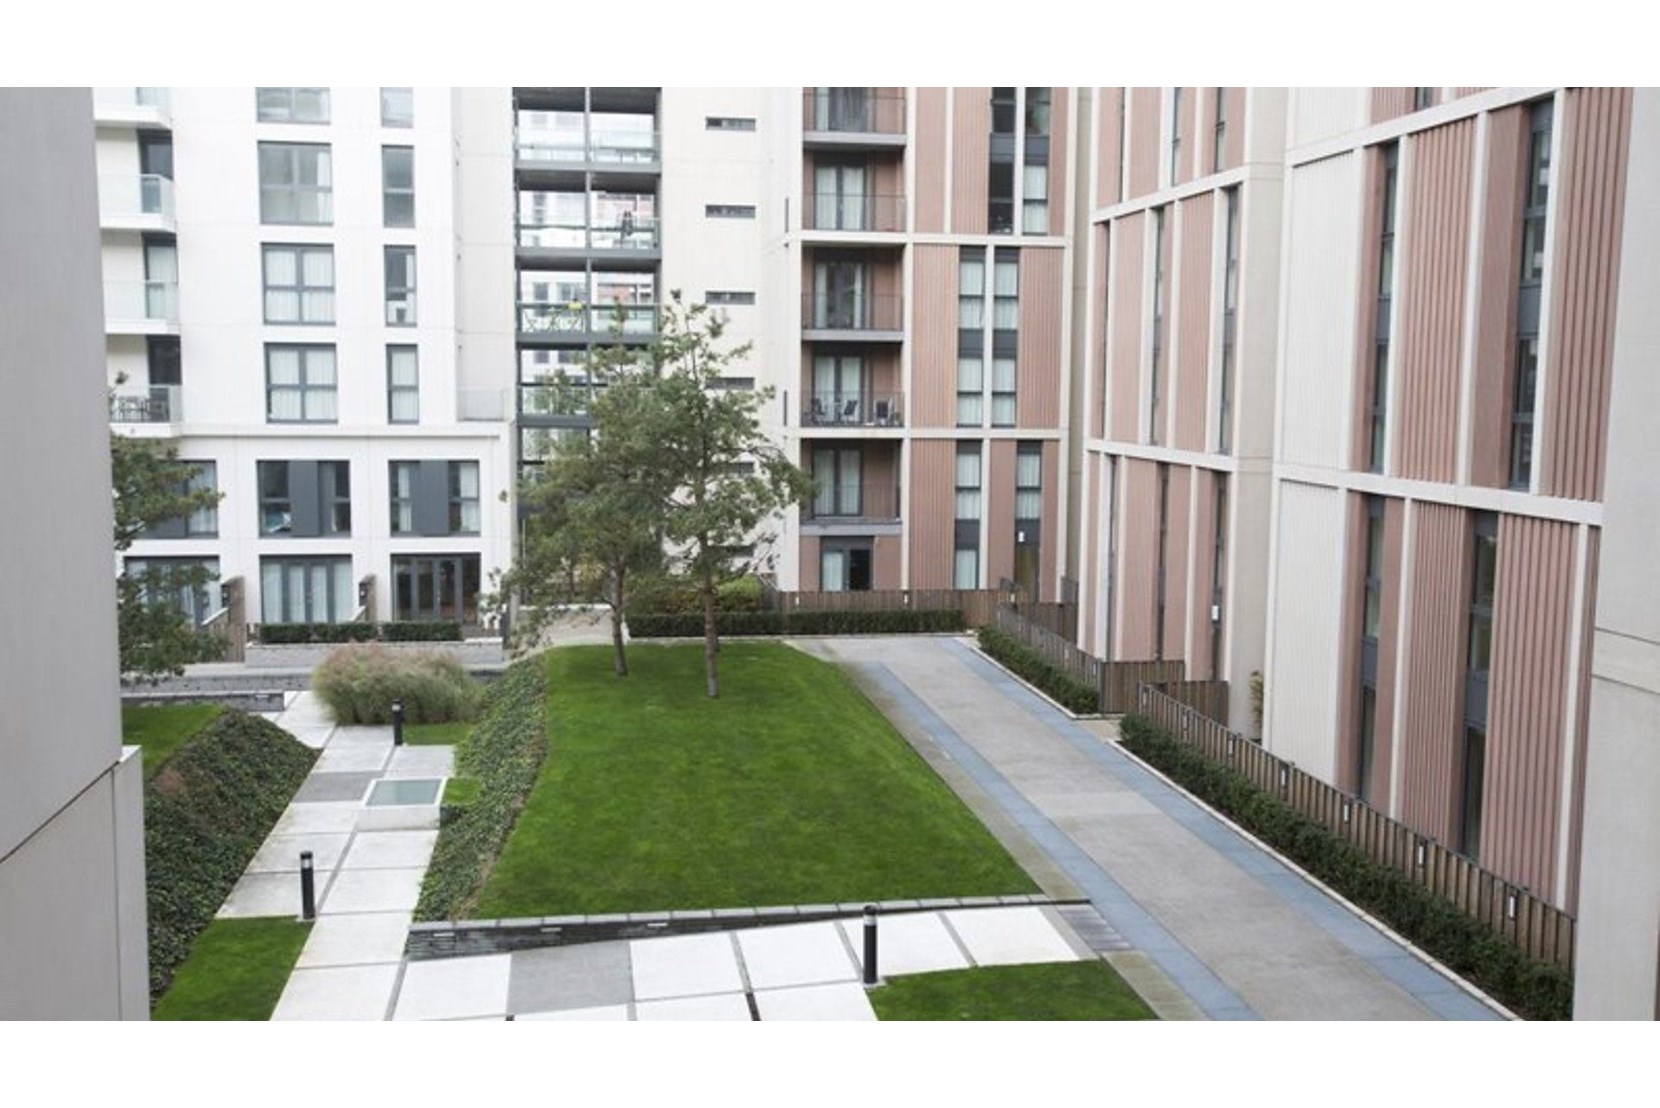 Apartments to Rent by Get Living at East Village, Newham, E20, communal gardens